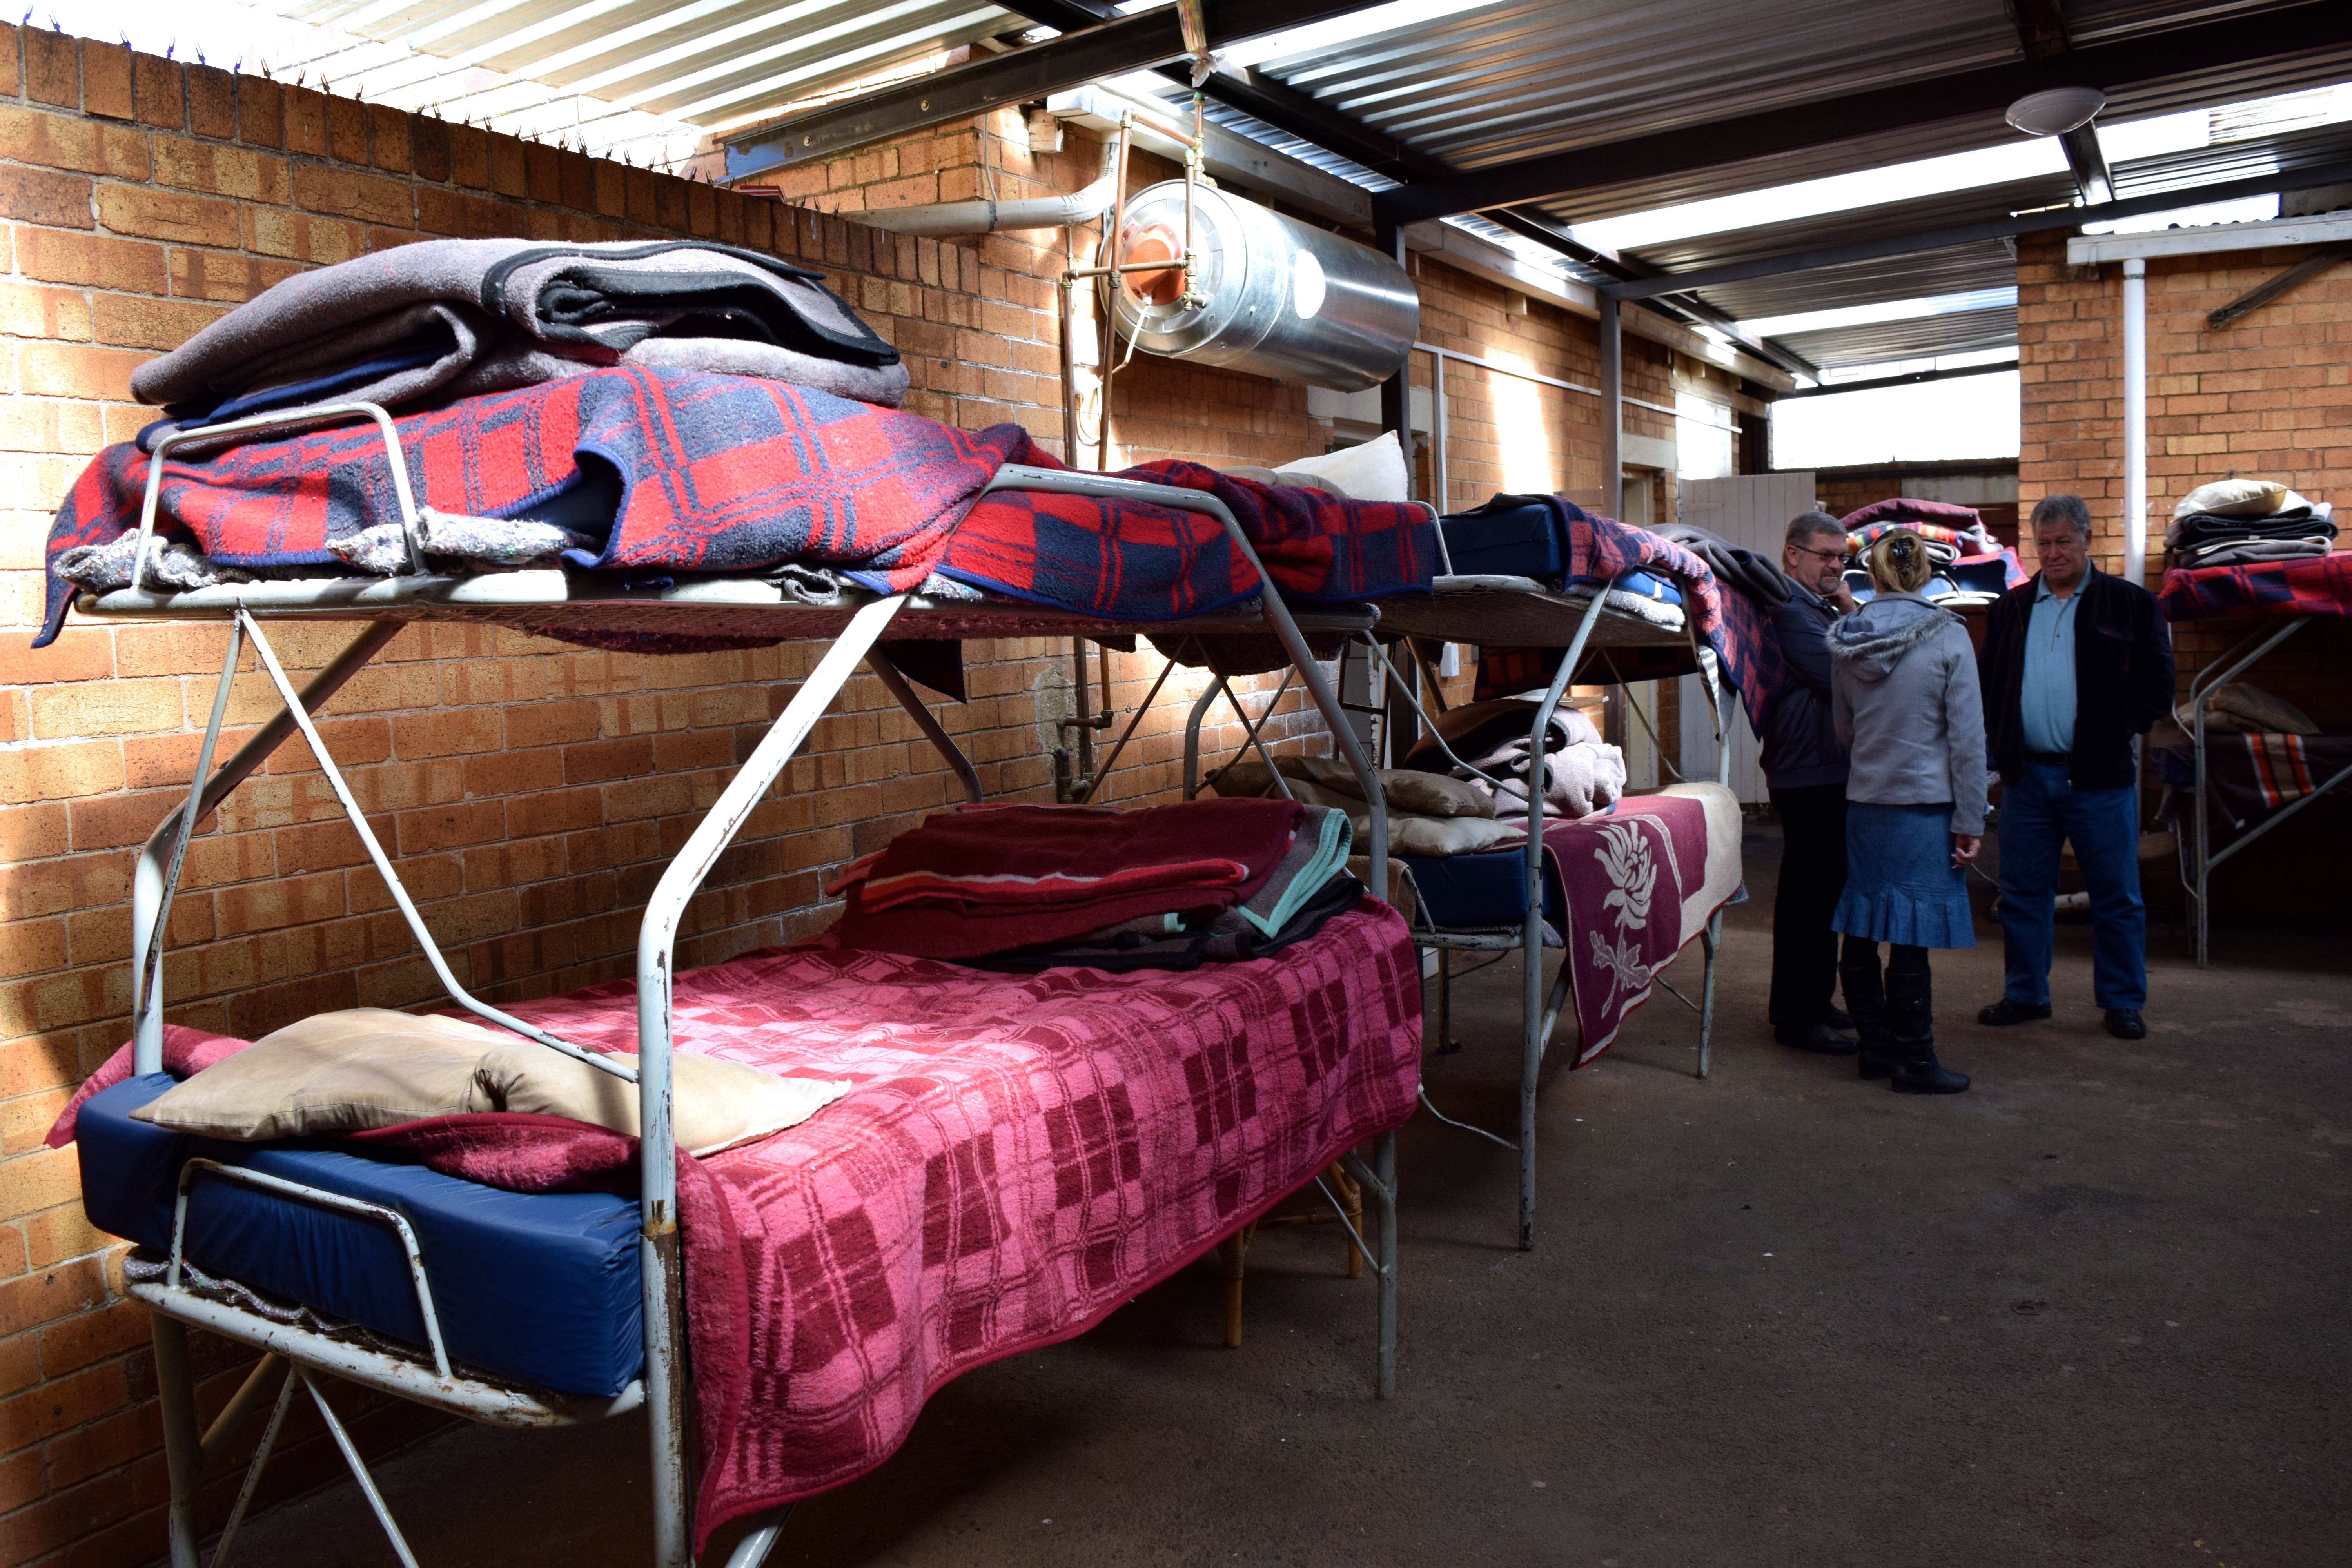 South African shelter fights homelessness "one person at a time" ‹ El